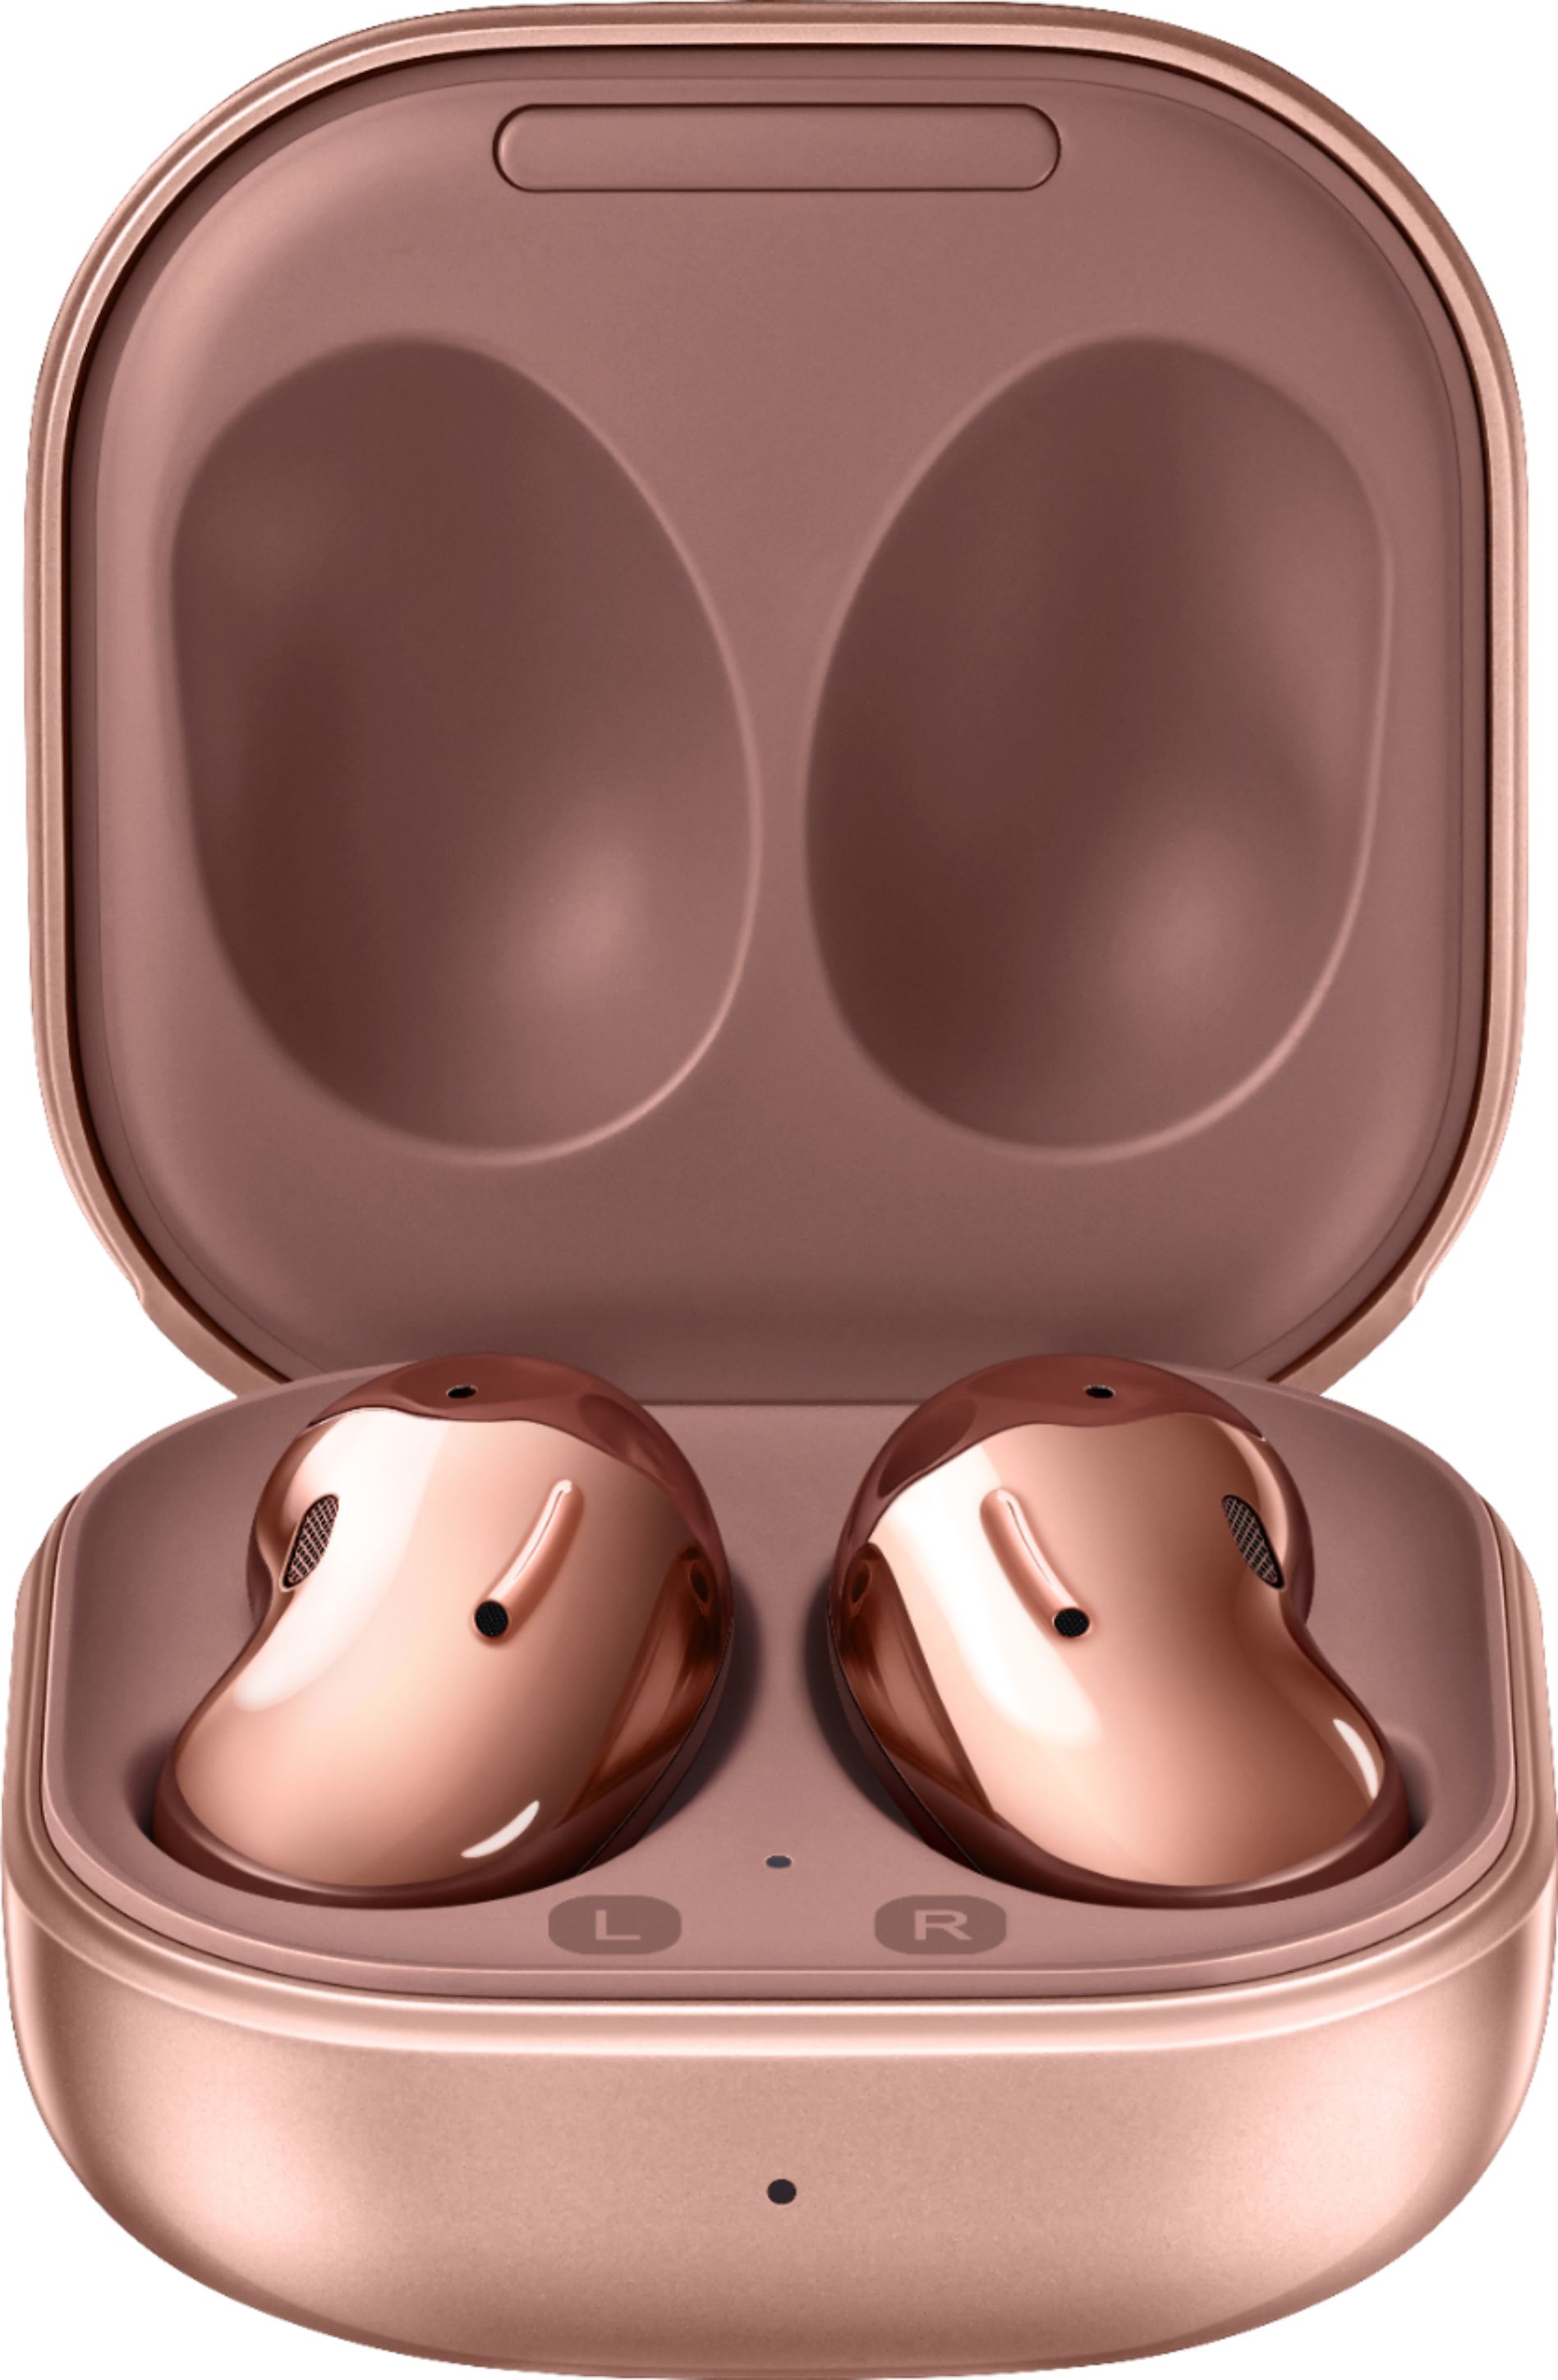 Samsung Galaxy Buds Live, Refurbished from Best Buy